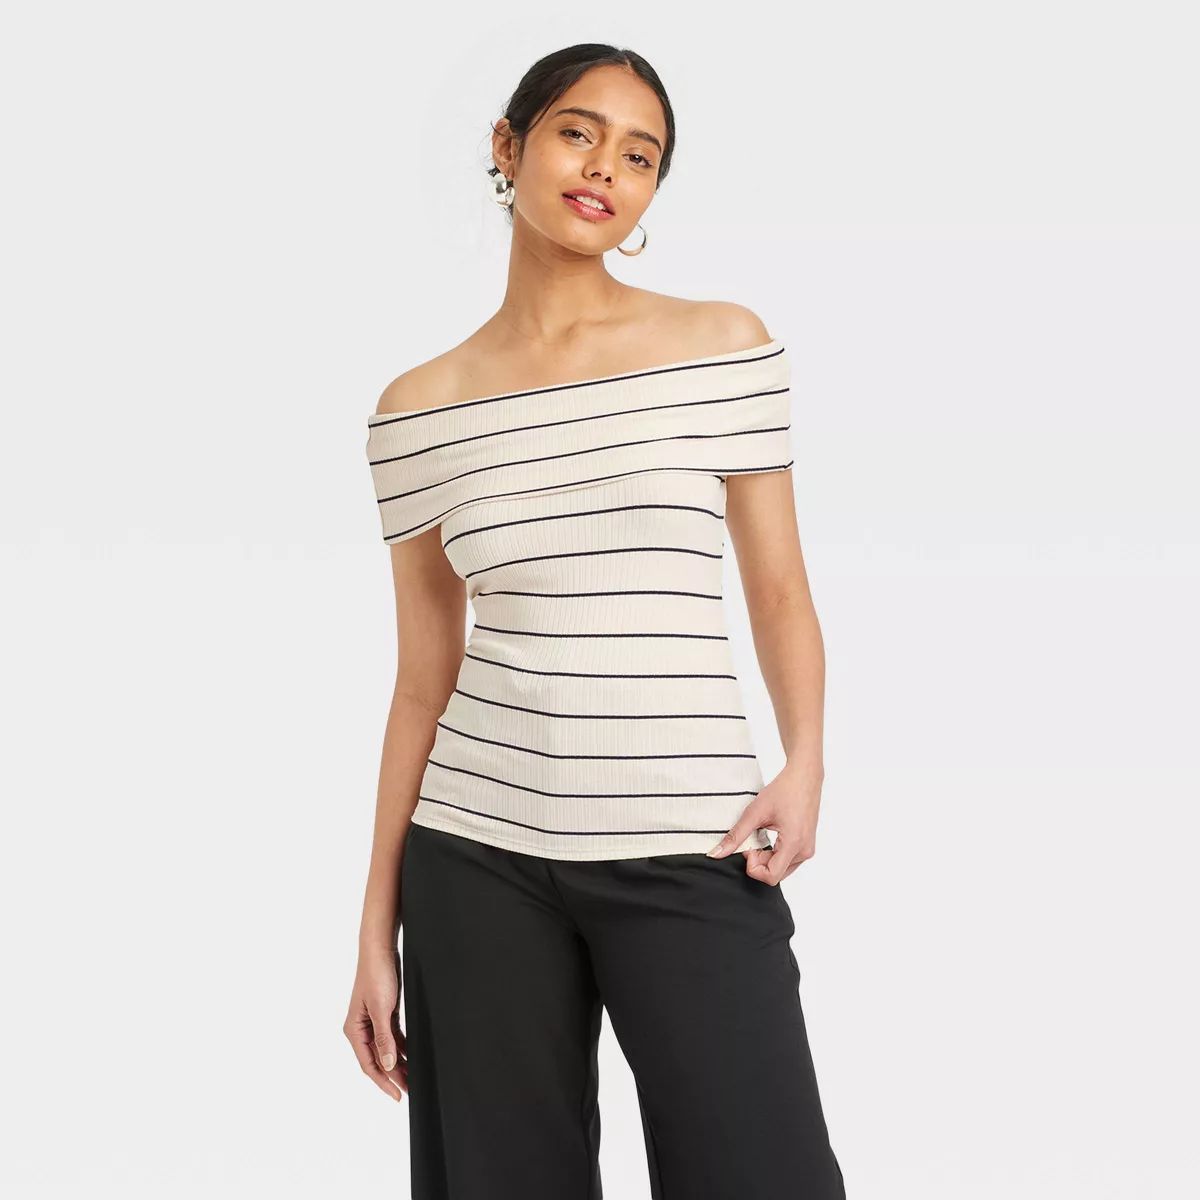 Women's Slim Fit Short Sleeve Off the Shoulder Top - A New Day™ White/Navy Striped S | Target